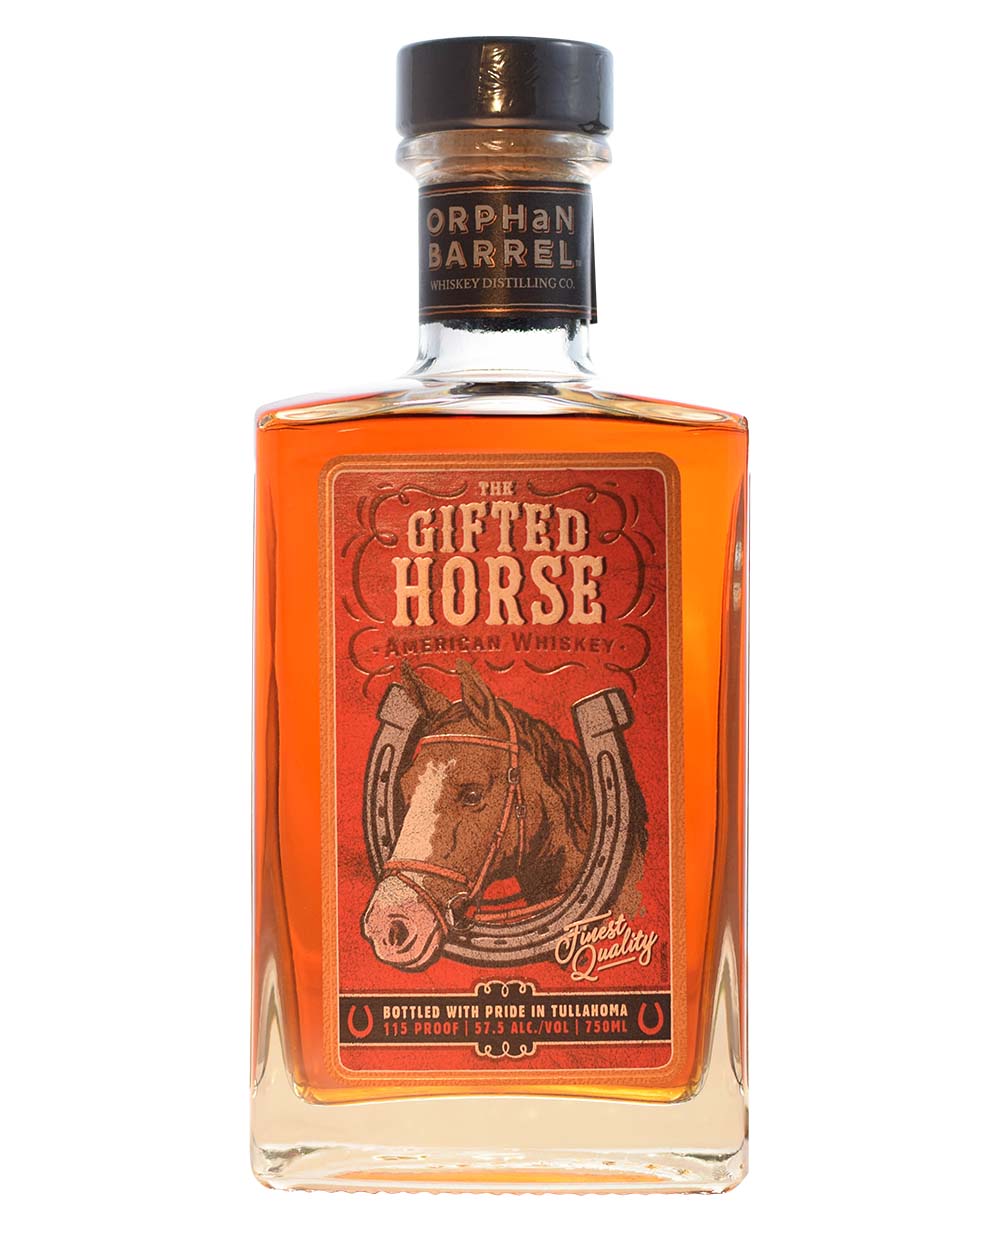 The Gifted Horse American Whiskey Musthave Malts MHM